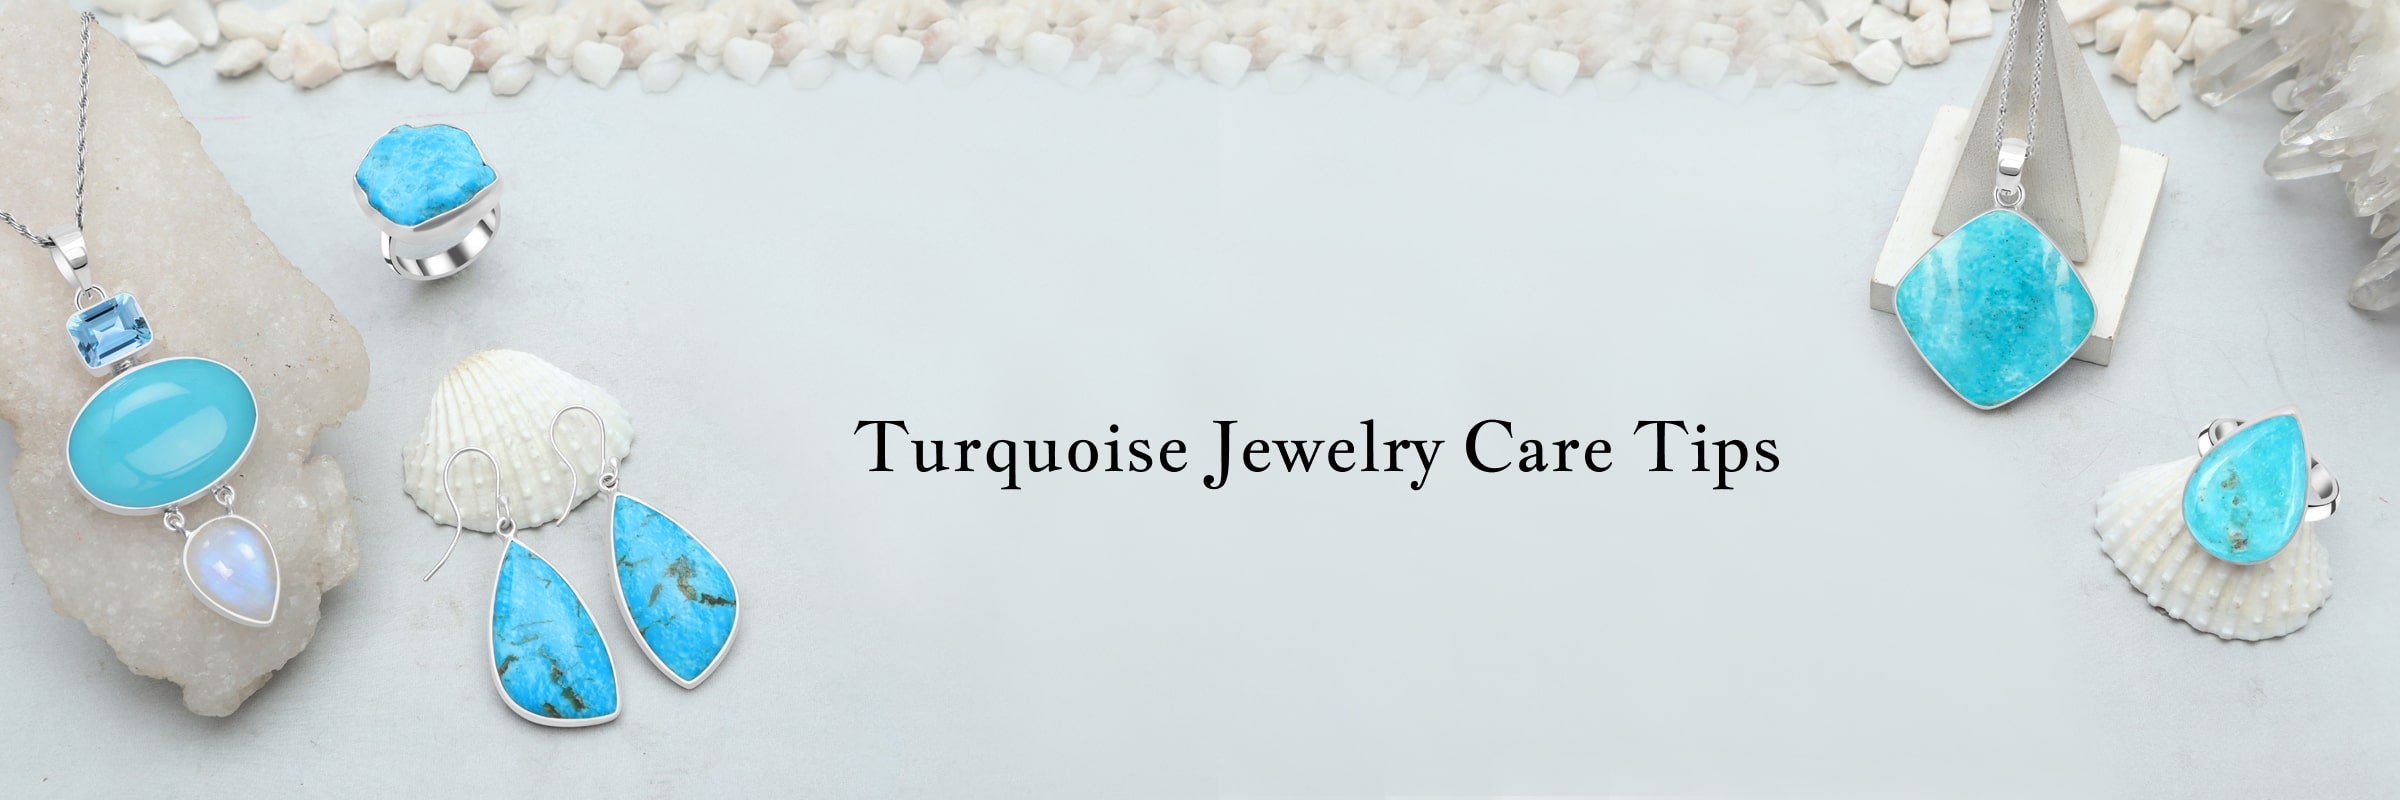 Care and Maintenance Guide for Your Turquoise Jewelry